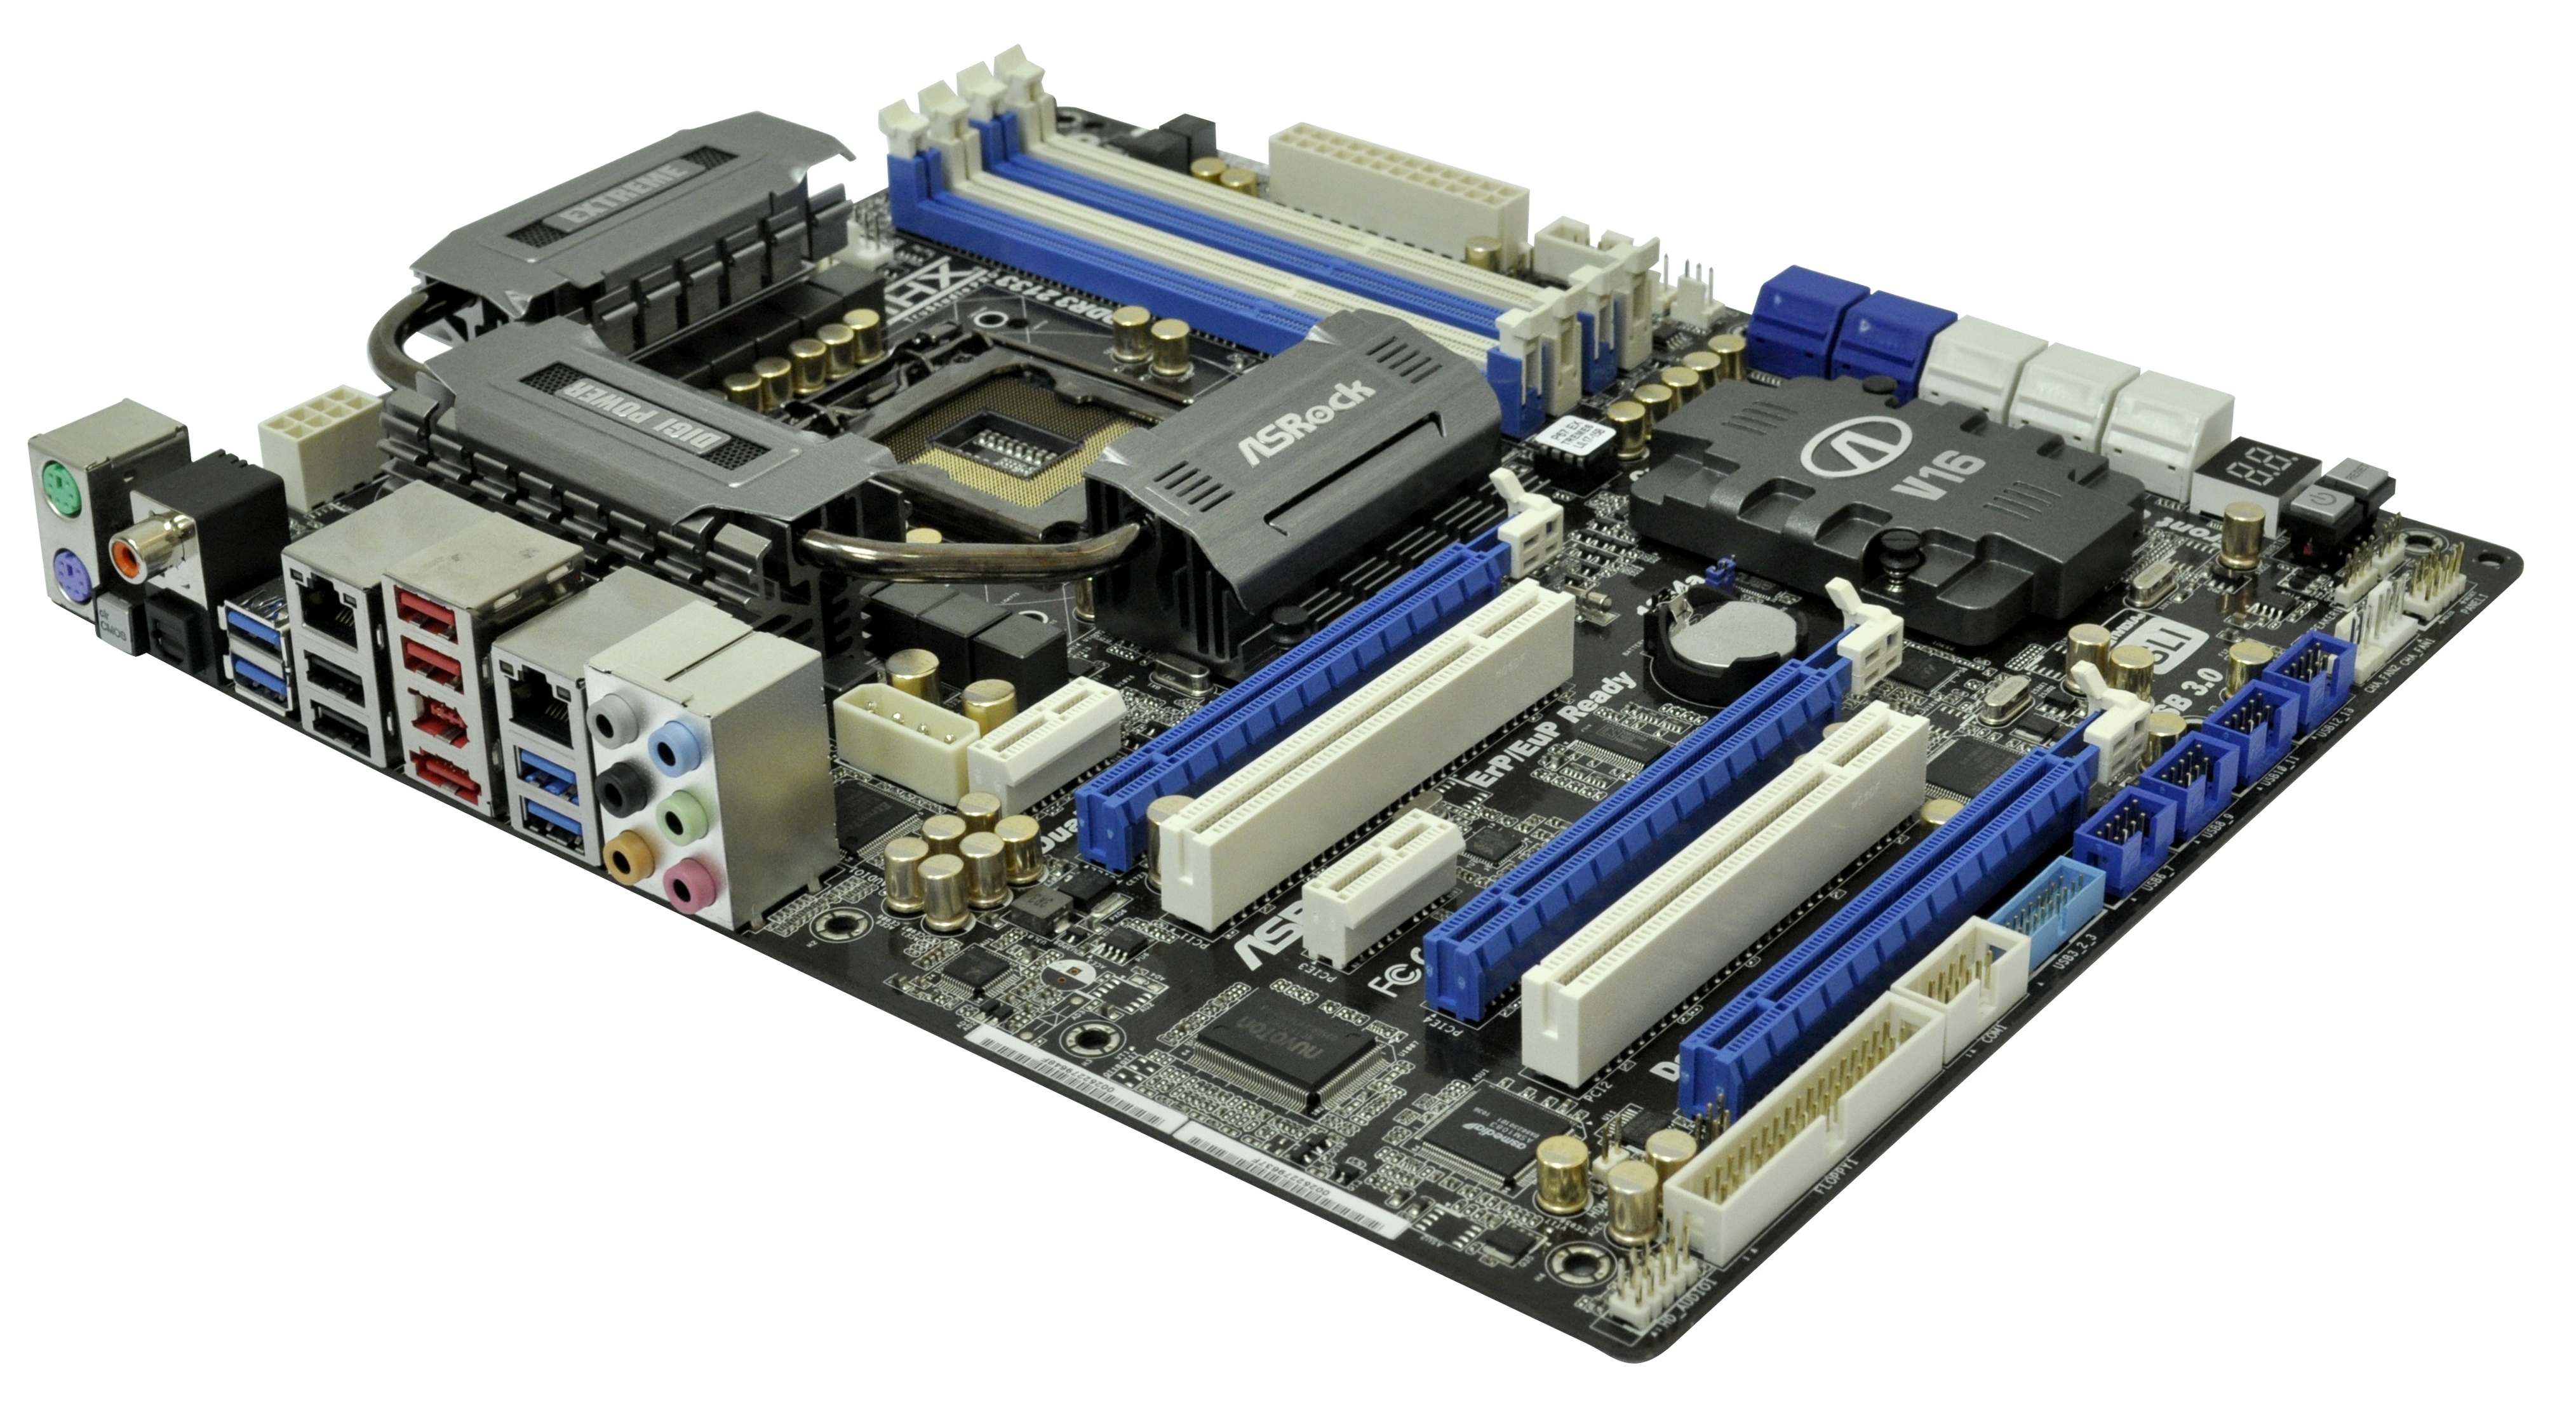 ASRock P67 Extreme6: Overview and Visual Inspection - P67 $190 